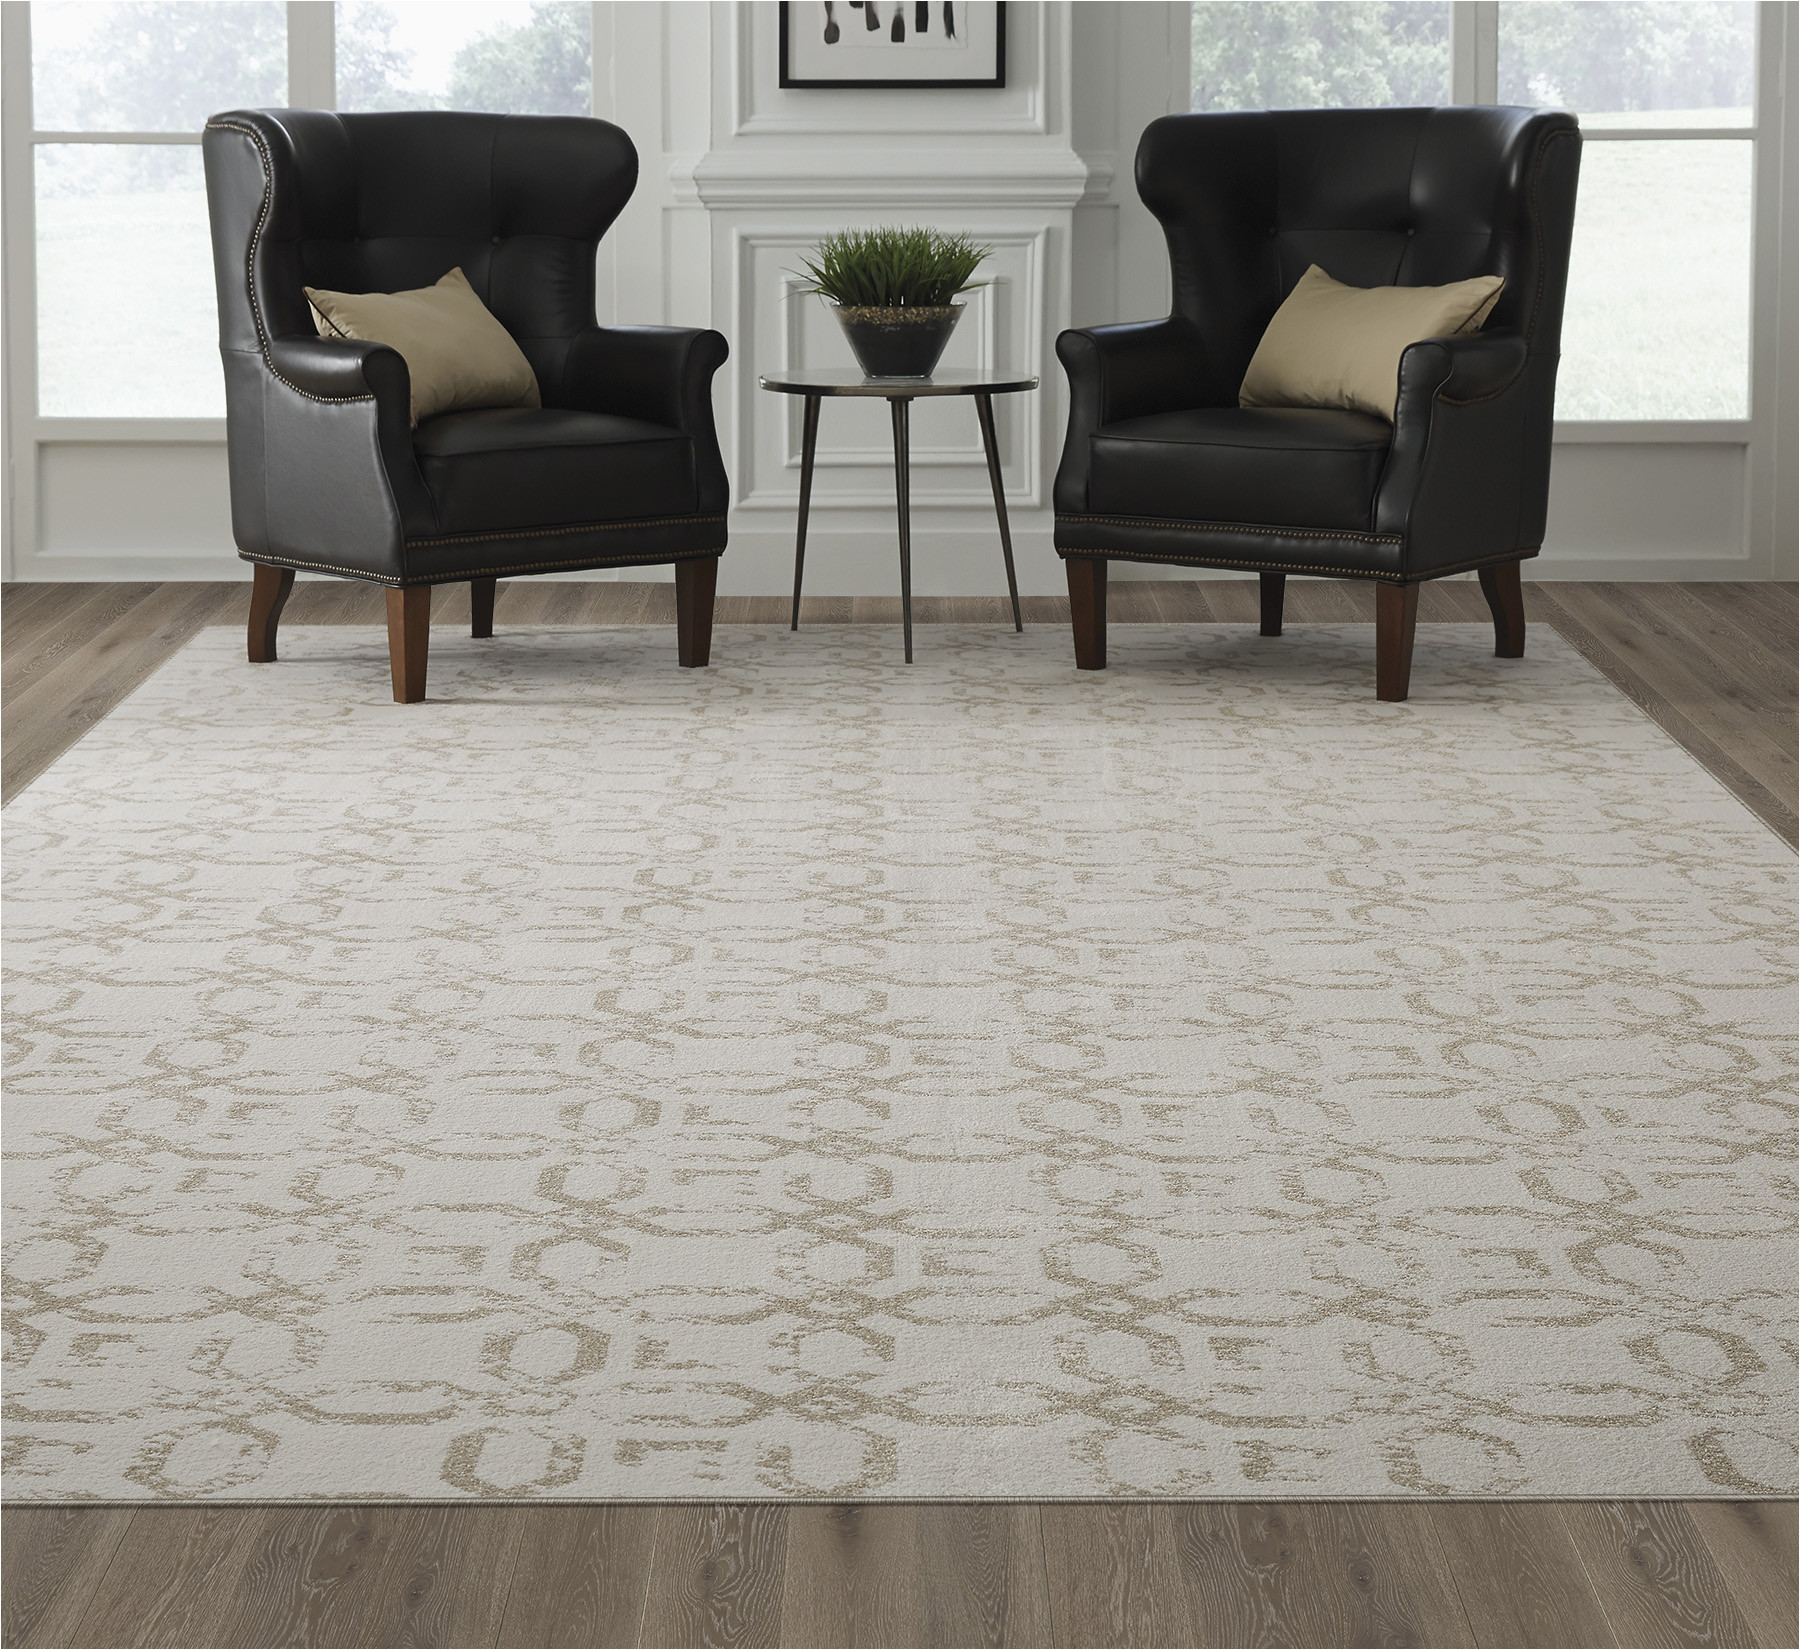 Cheap area Rugs Rochester Ny Hard Surface & area Rugs Go together Features Floor Covering …